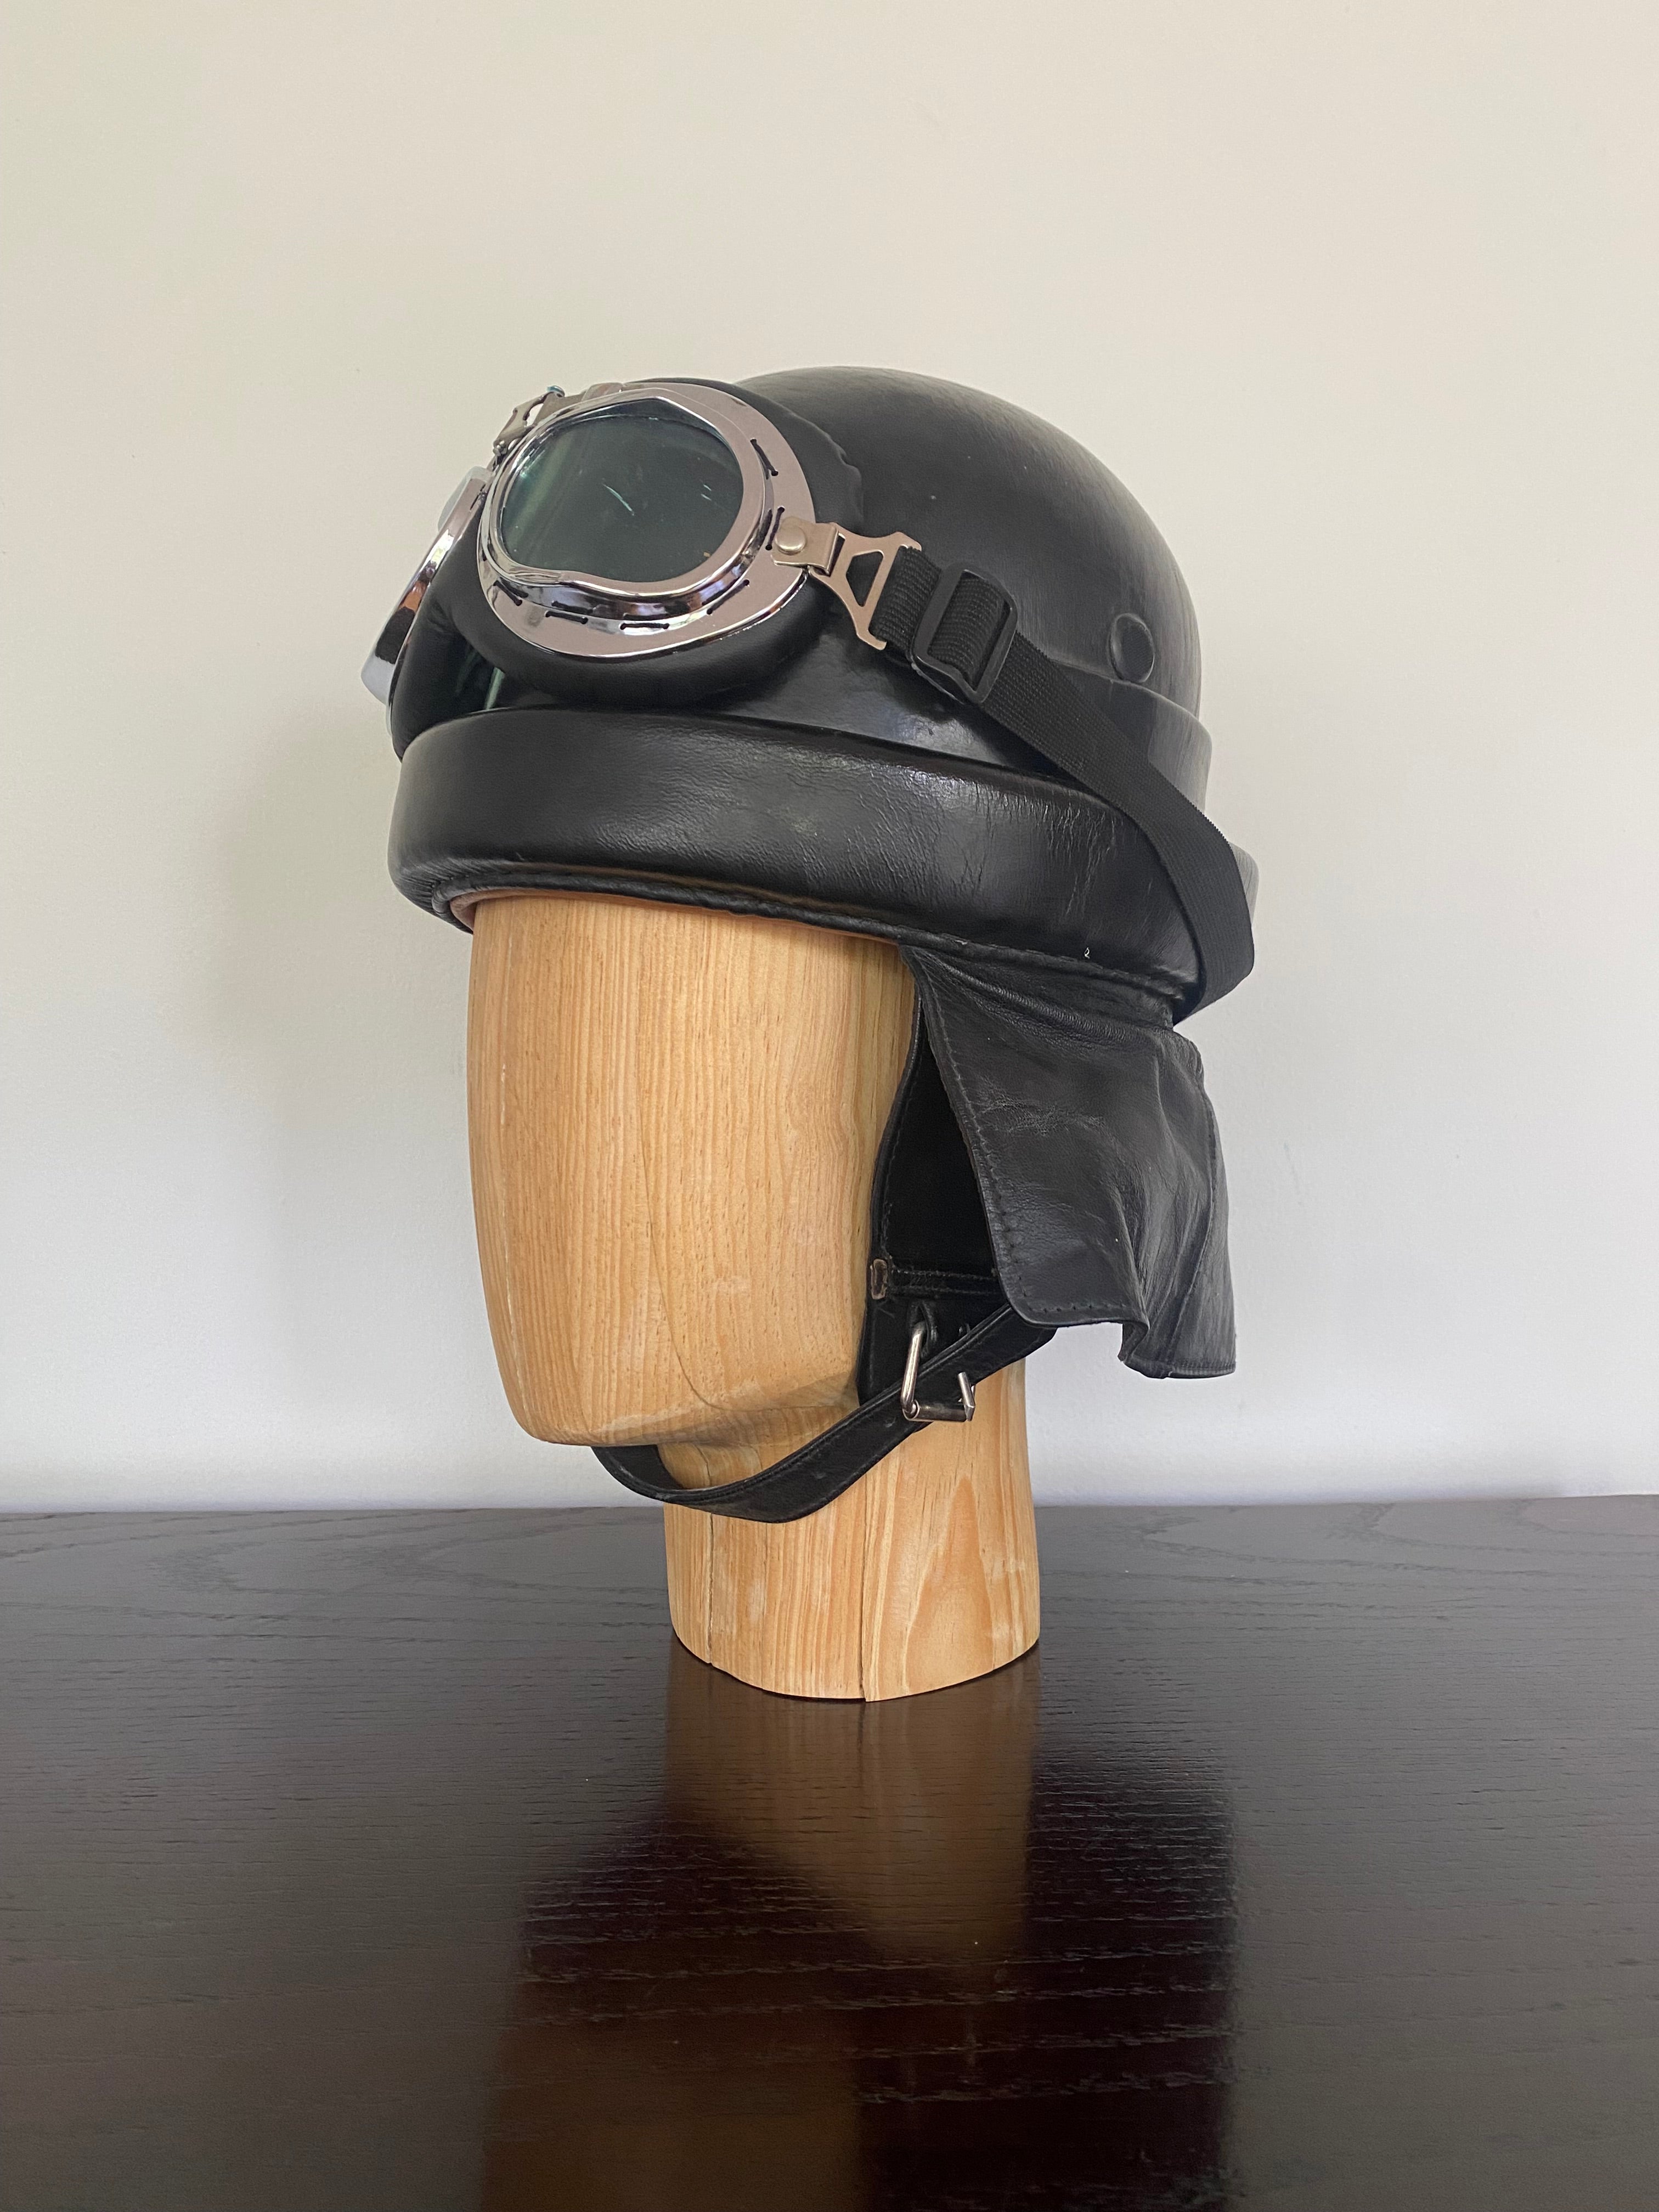 Original Italian Armored Division M35 helmet for tankers and motorcyclist , 1930s - 1960s